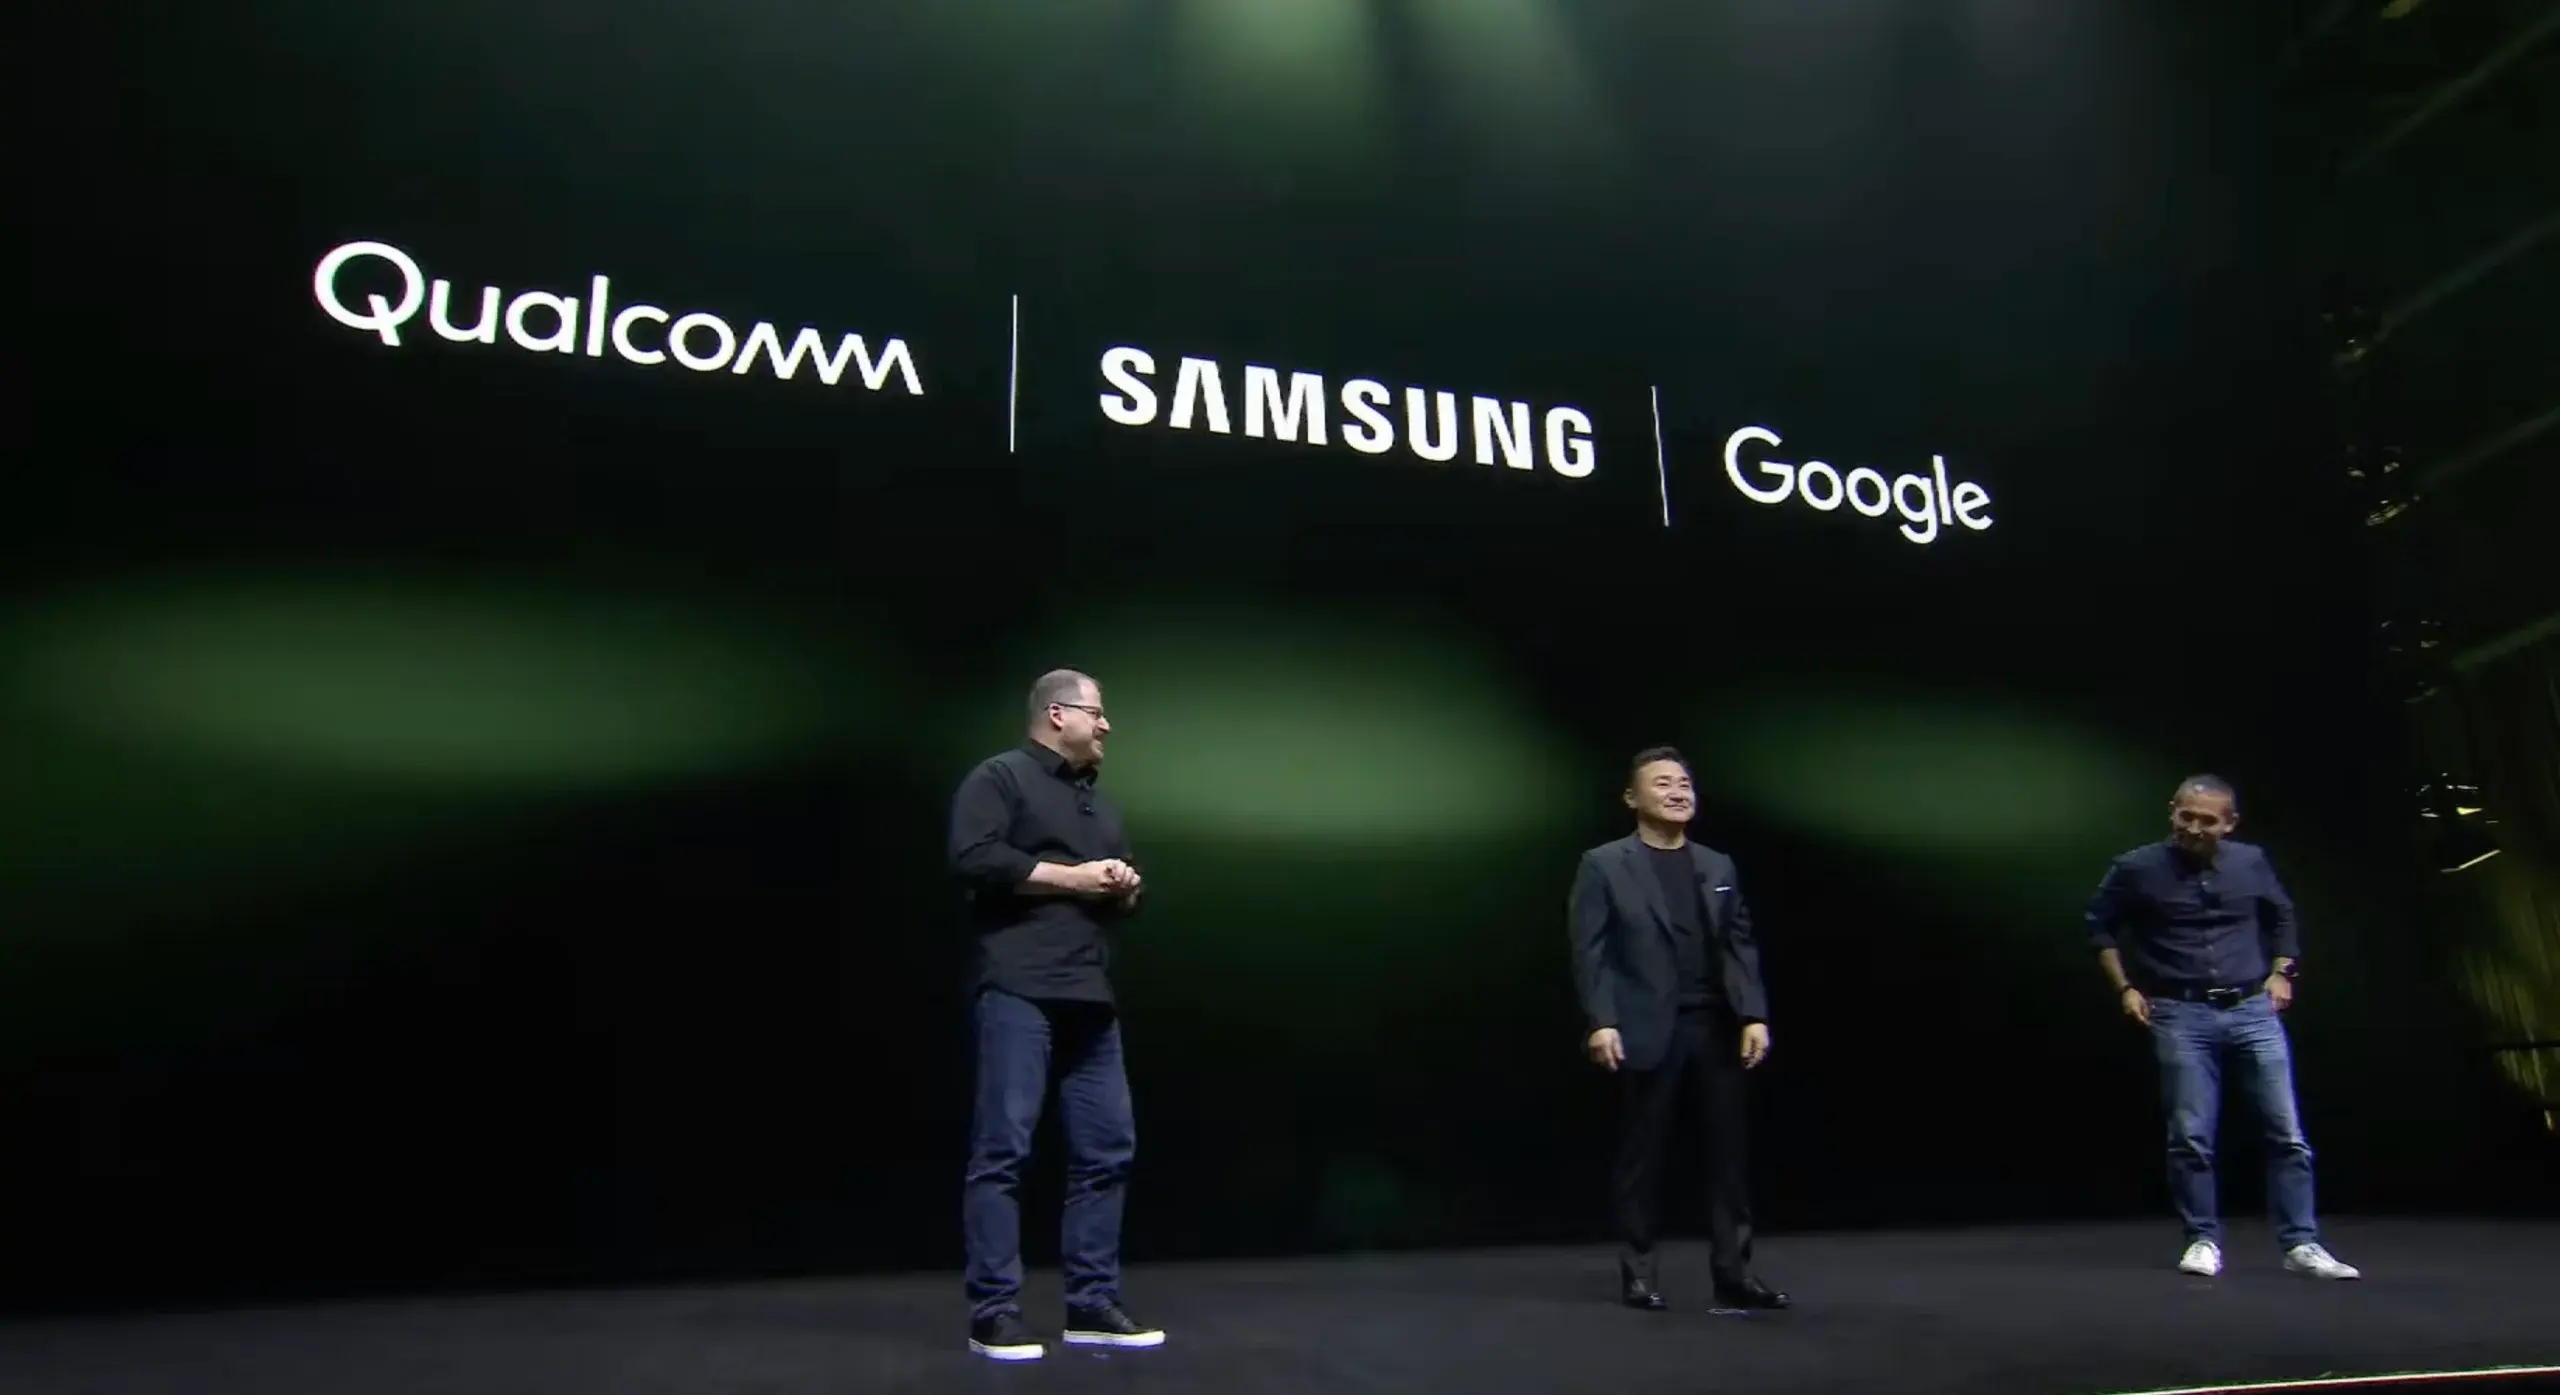 Samsung, Google and Qualcomm team up to fight Apple